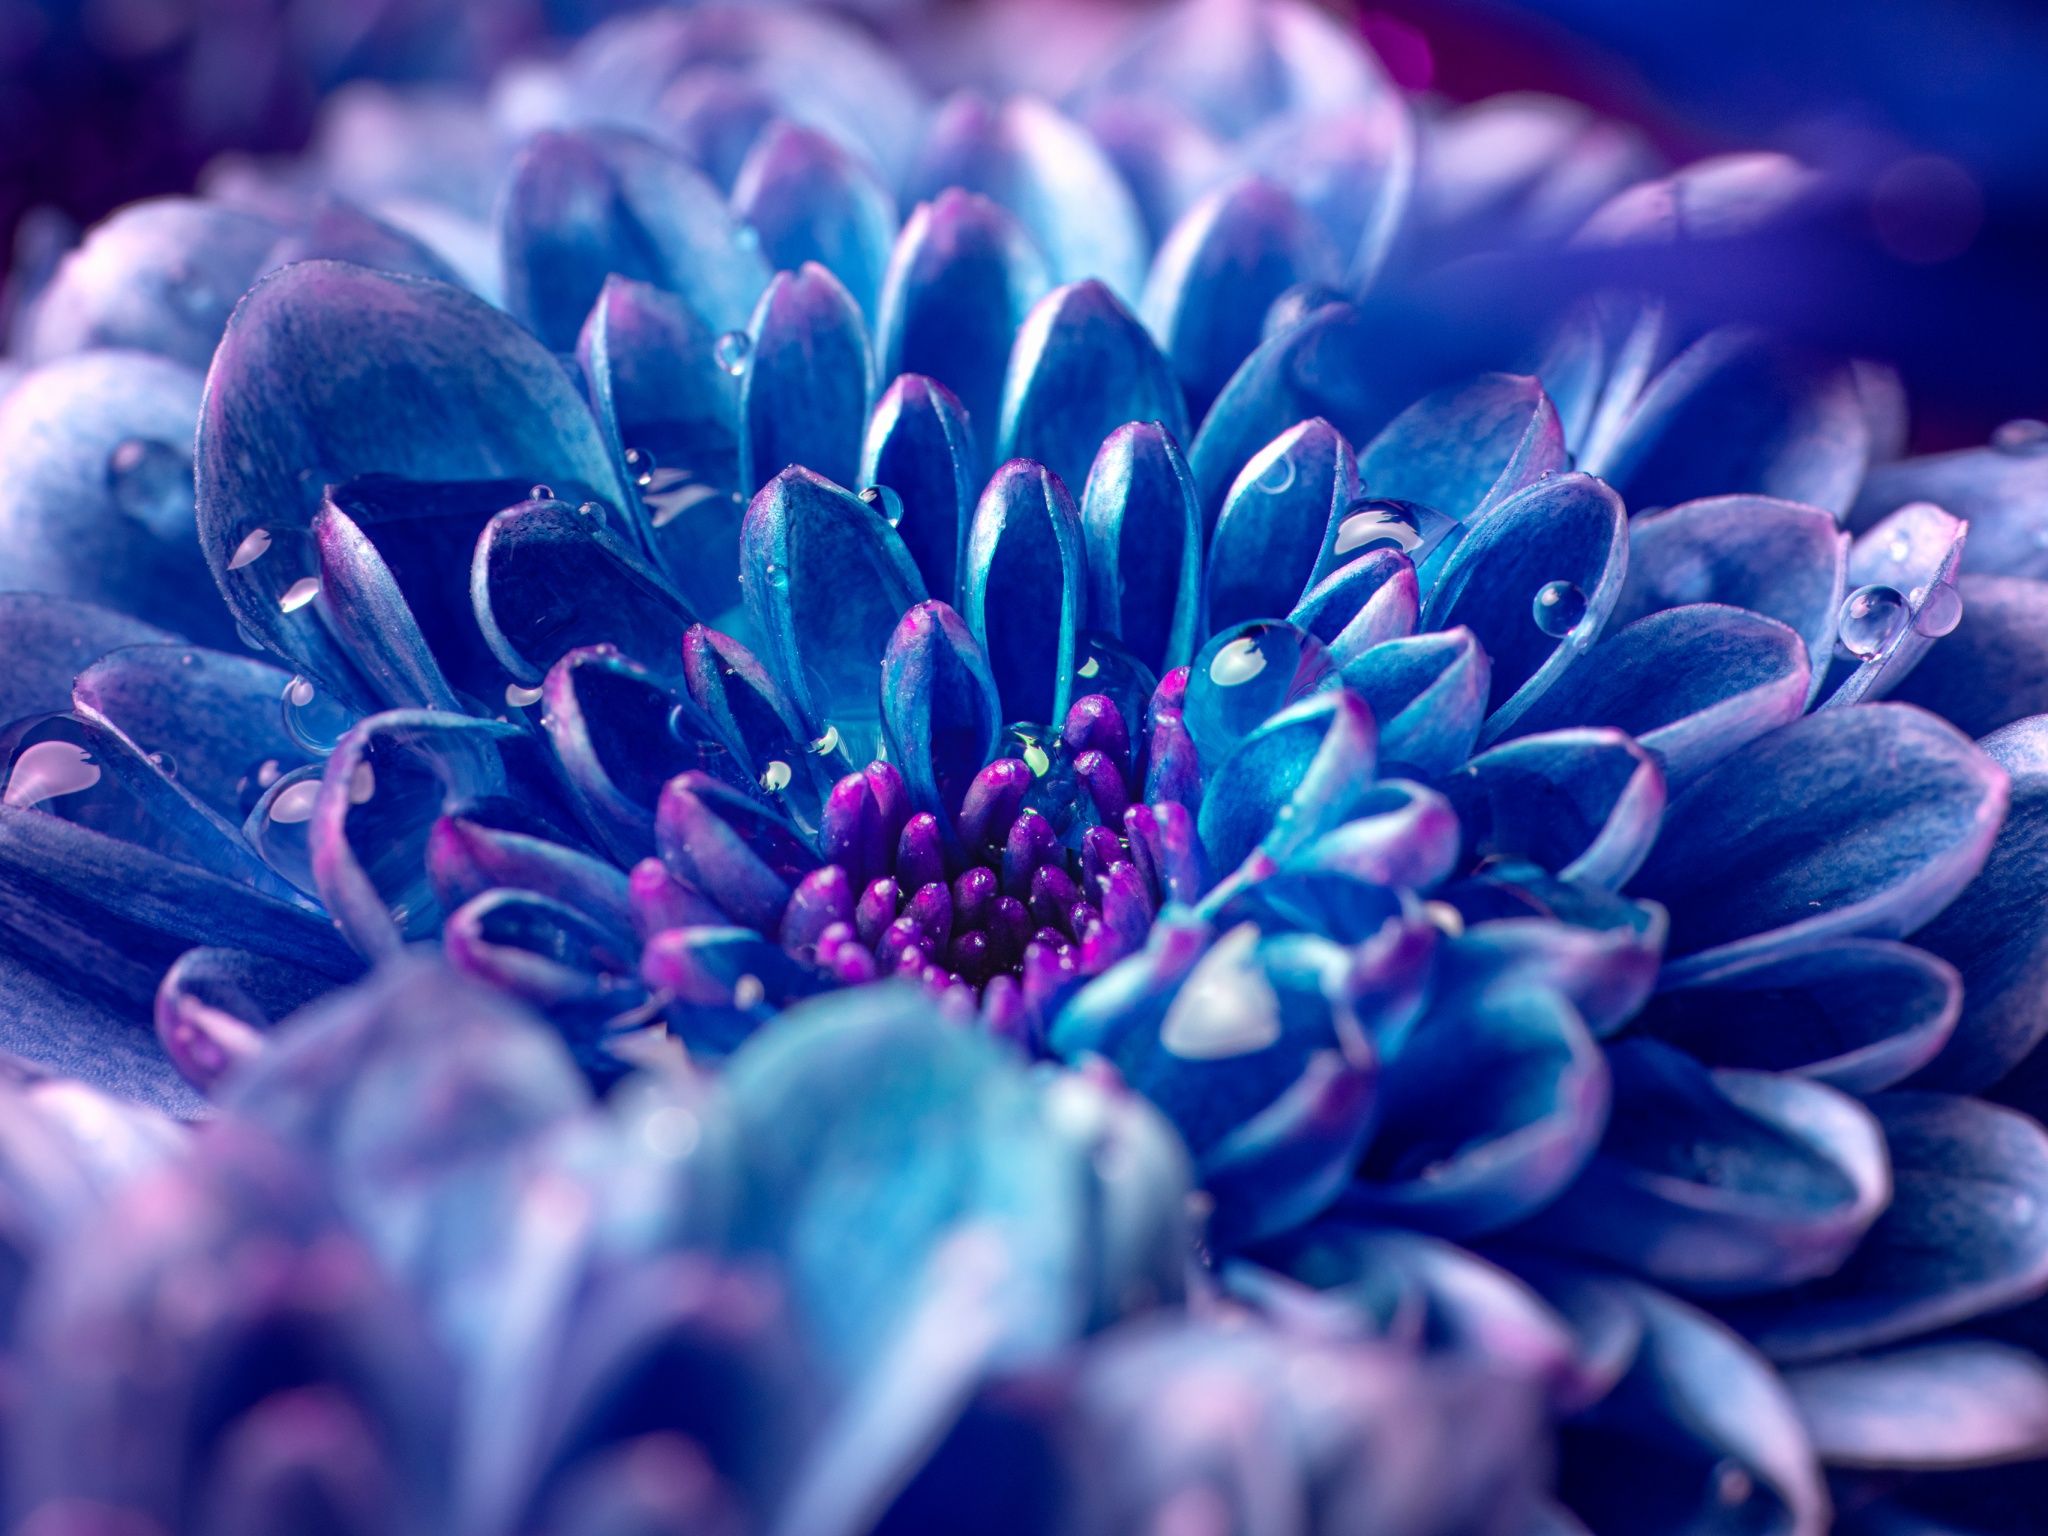 A close up of a blue flower with water droplets on it - Macro